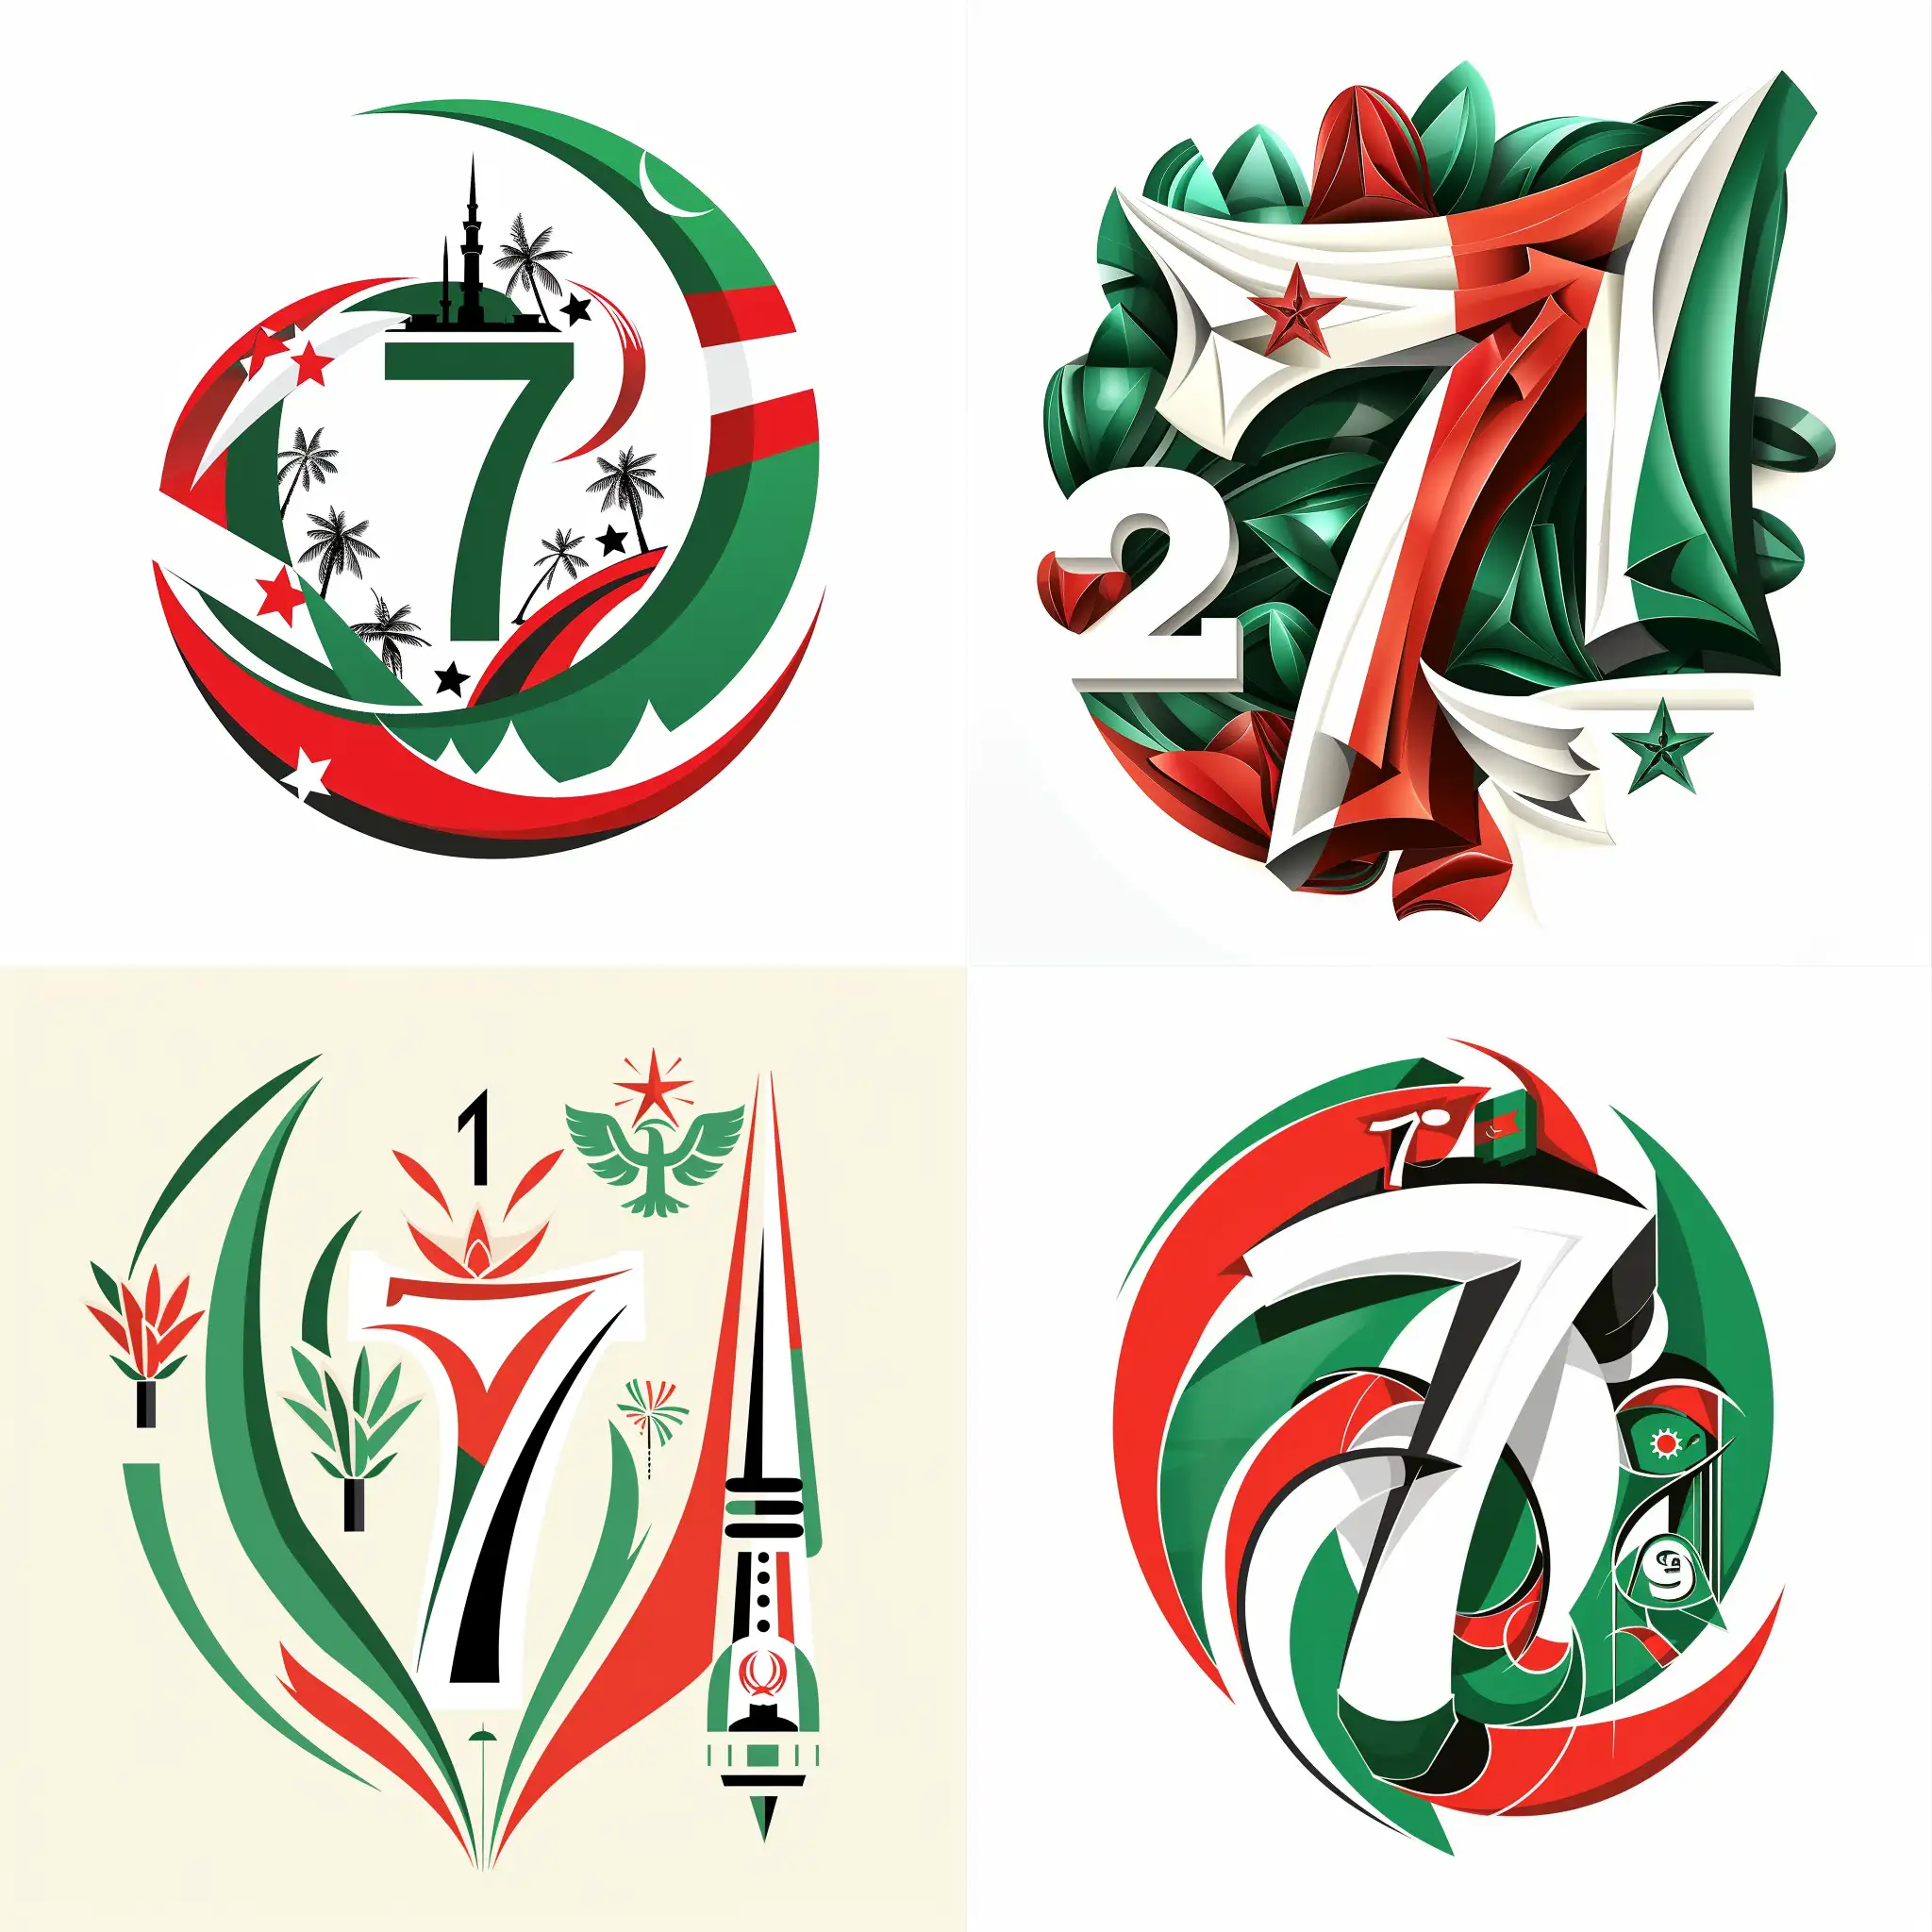 Seventieth-Anniversary-Liberation-Revolution-Day-Logo-with-Symbols-of-Struggle-in-White-Red-and-Green